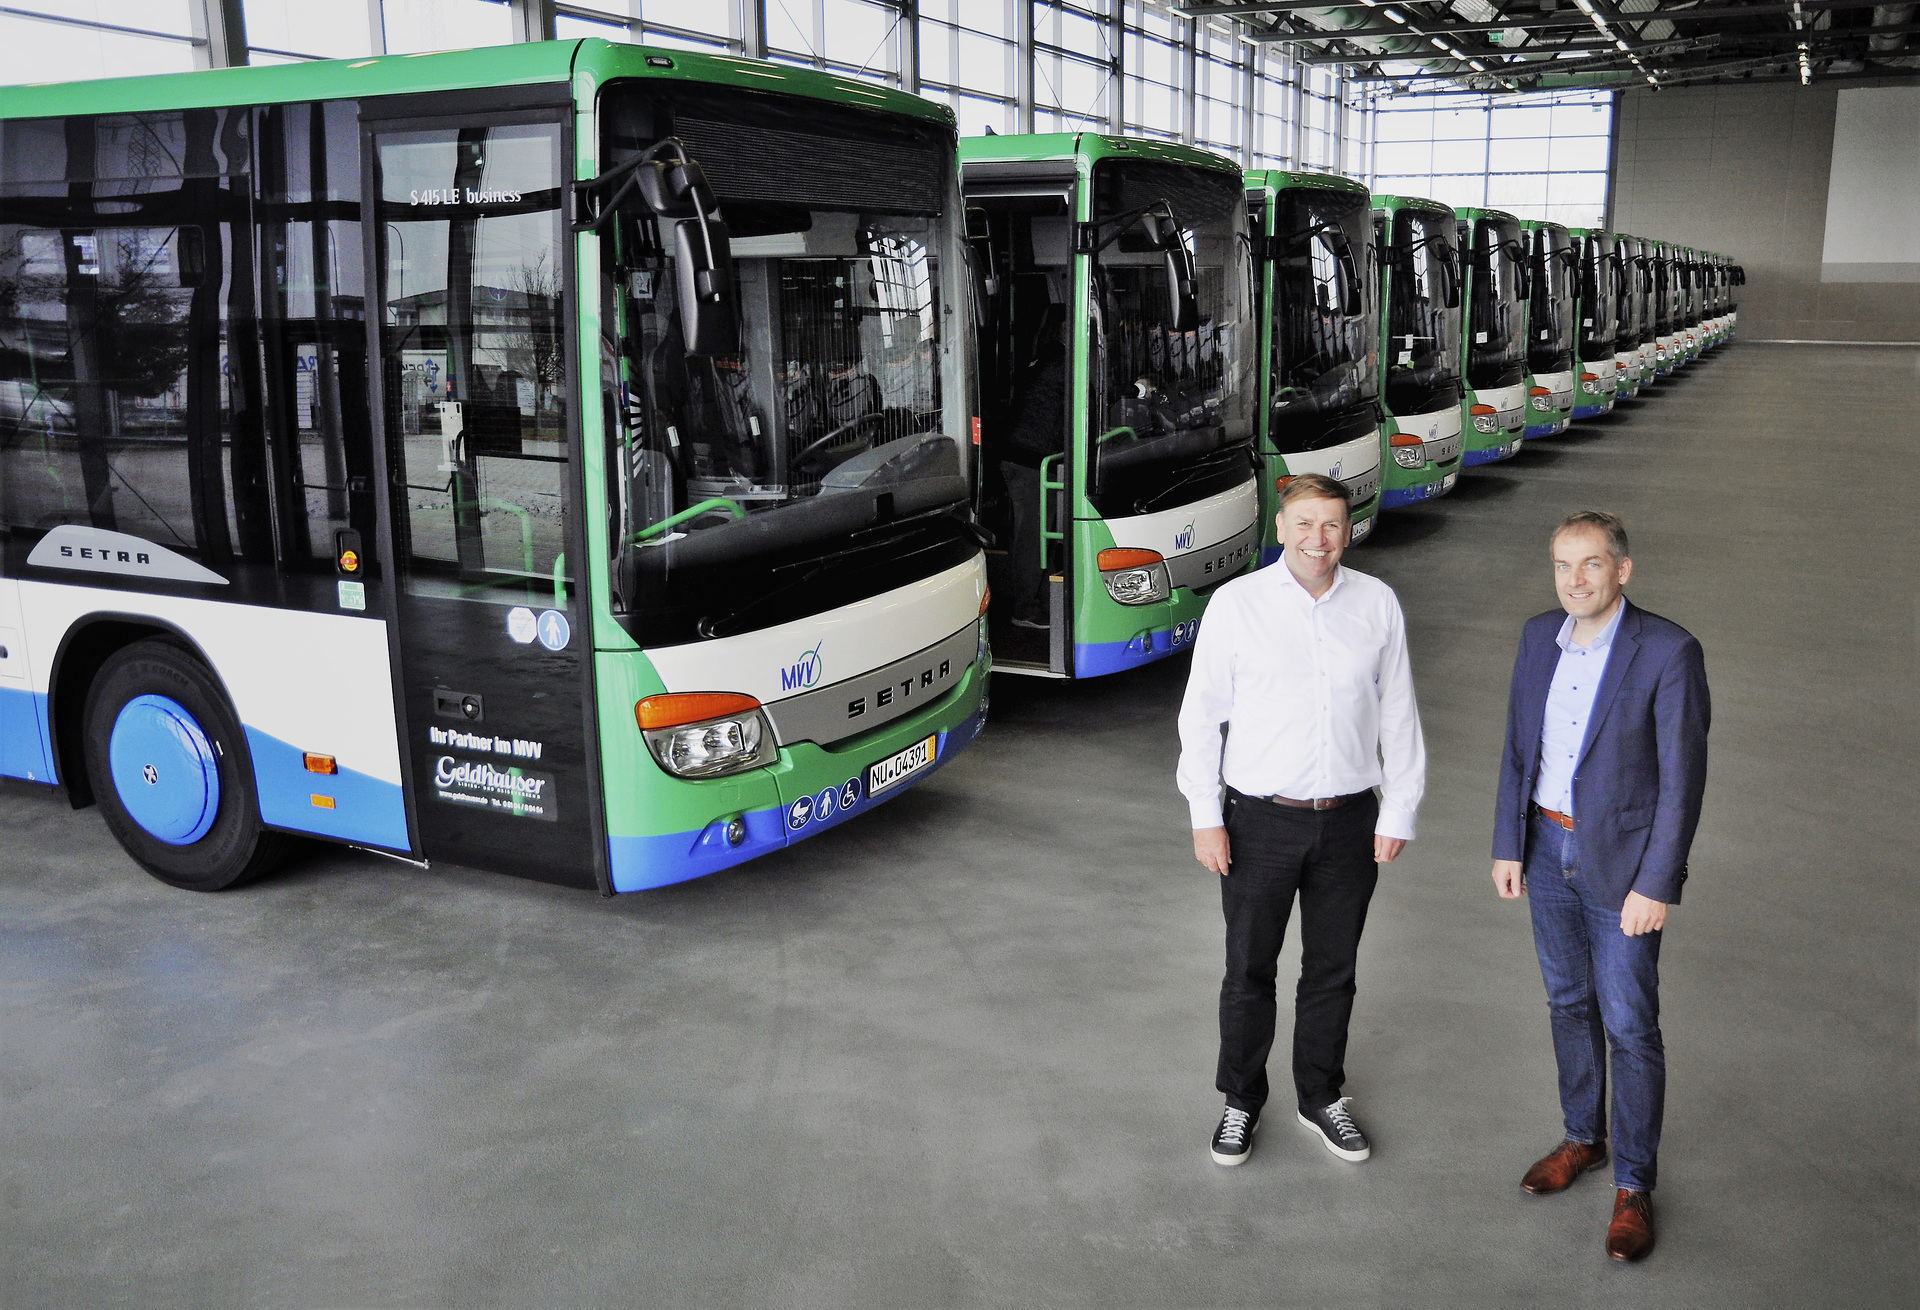 35 Setra Buses for Three Companies